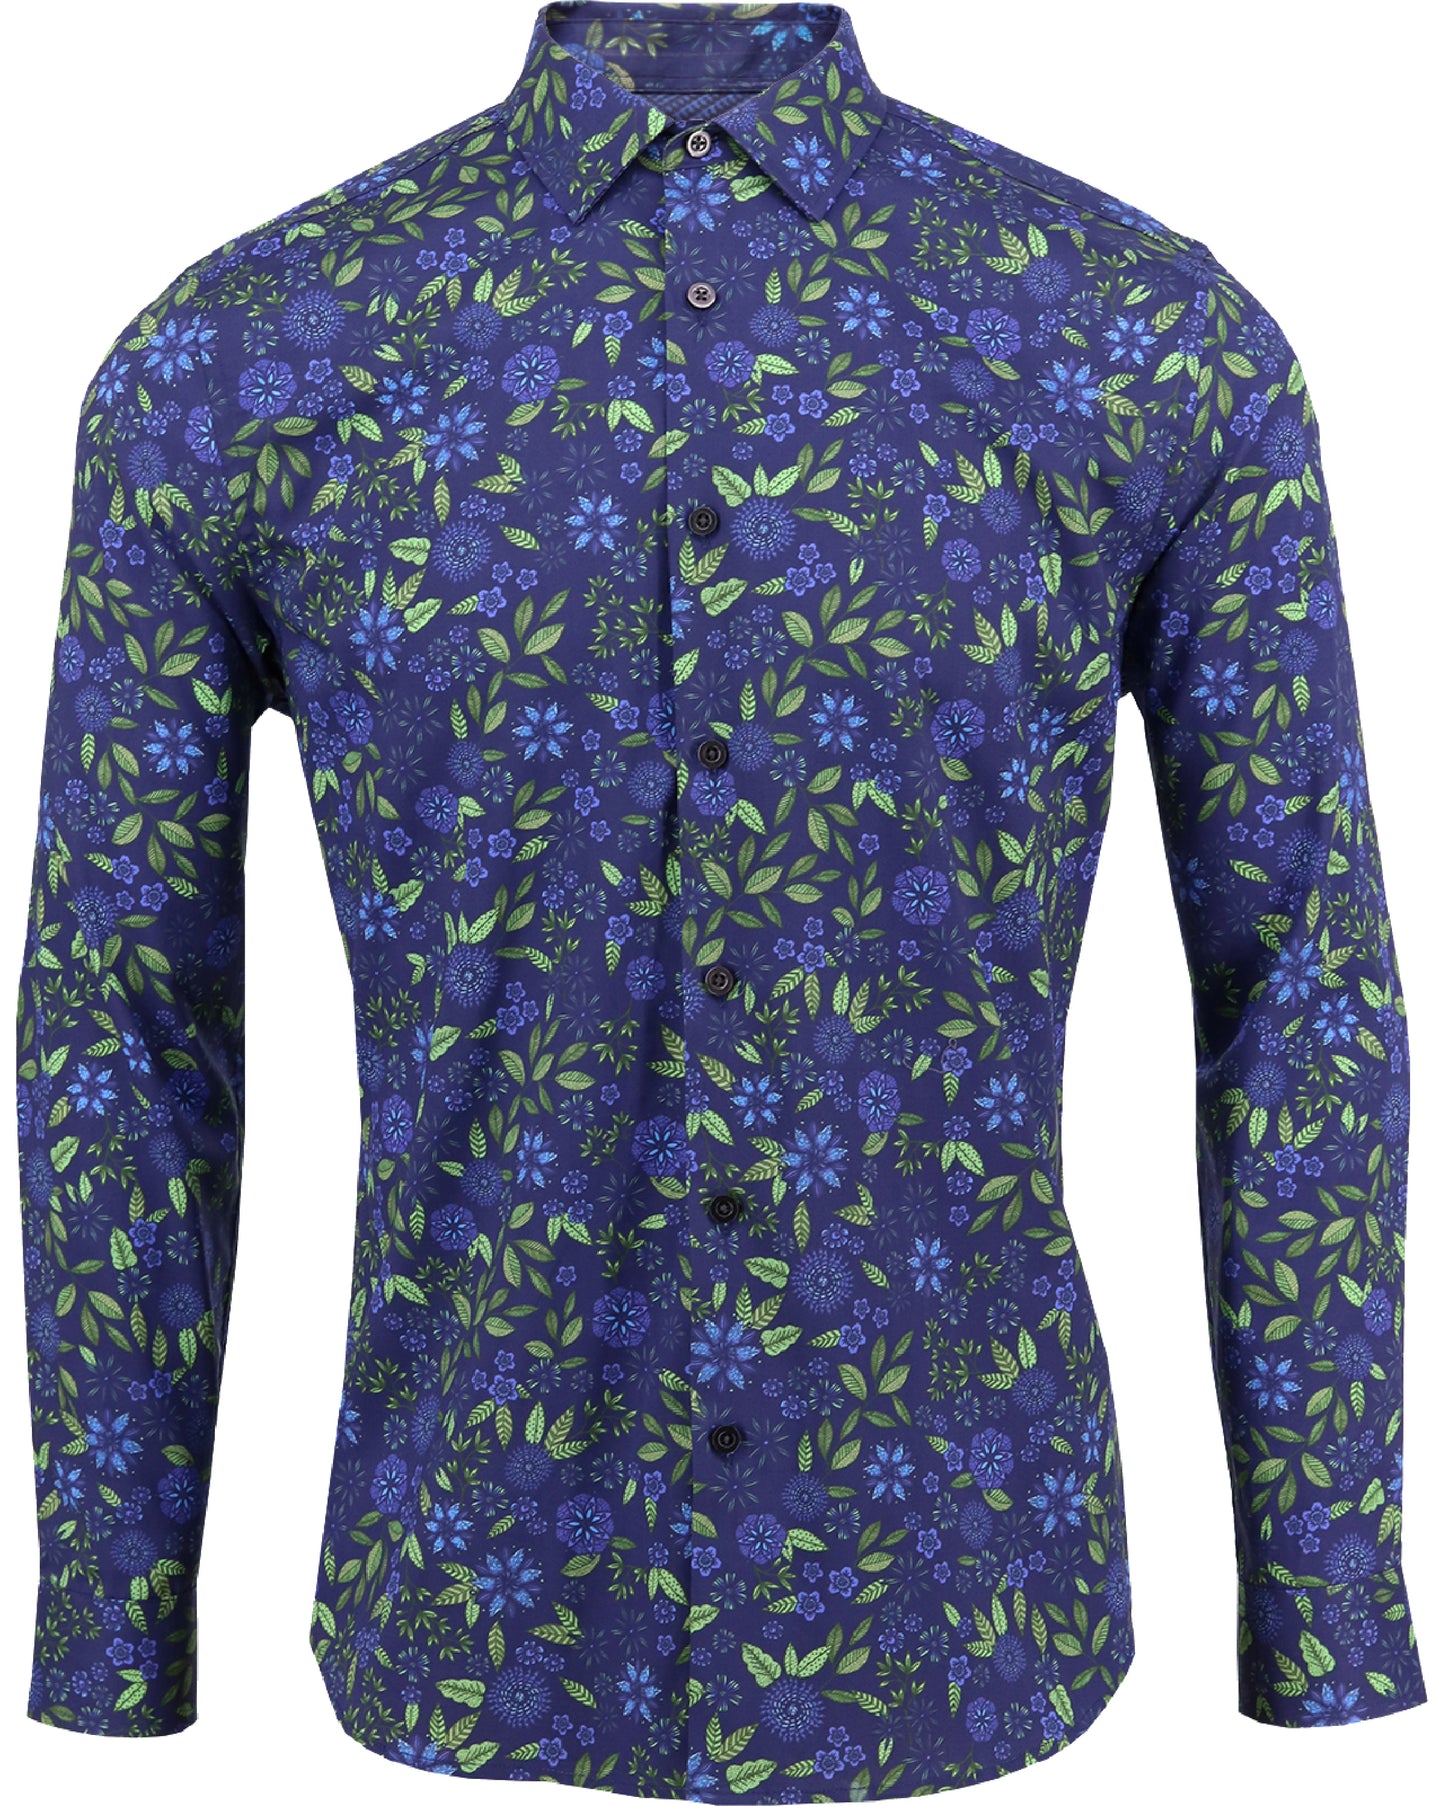 Long sleeved woven shirt with mechanical stretch for comfort.  This shirt has a modified spread collar and a tailored fit. Printed floral pattern in navy.